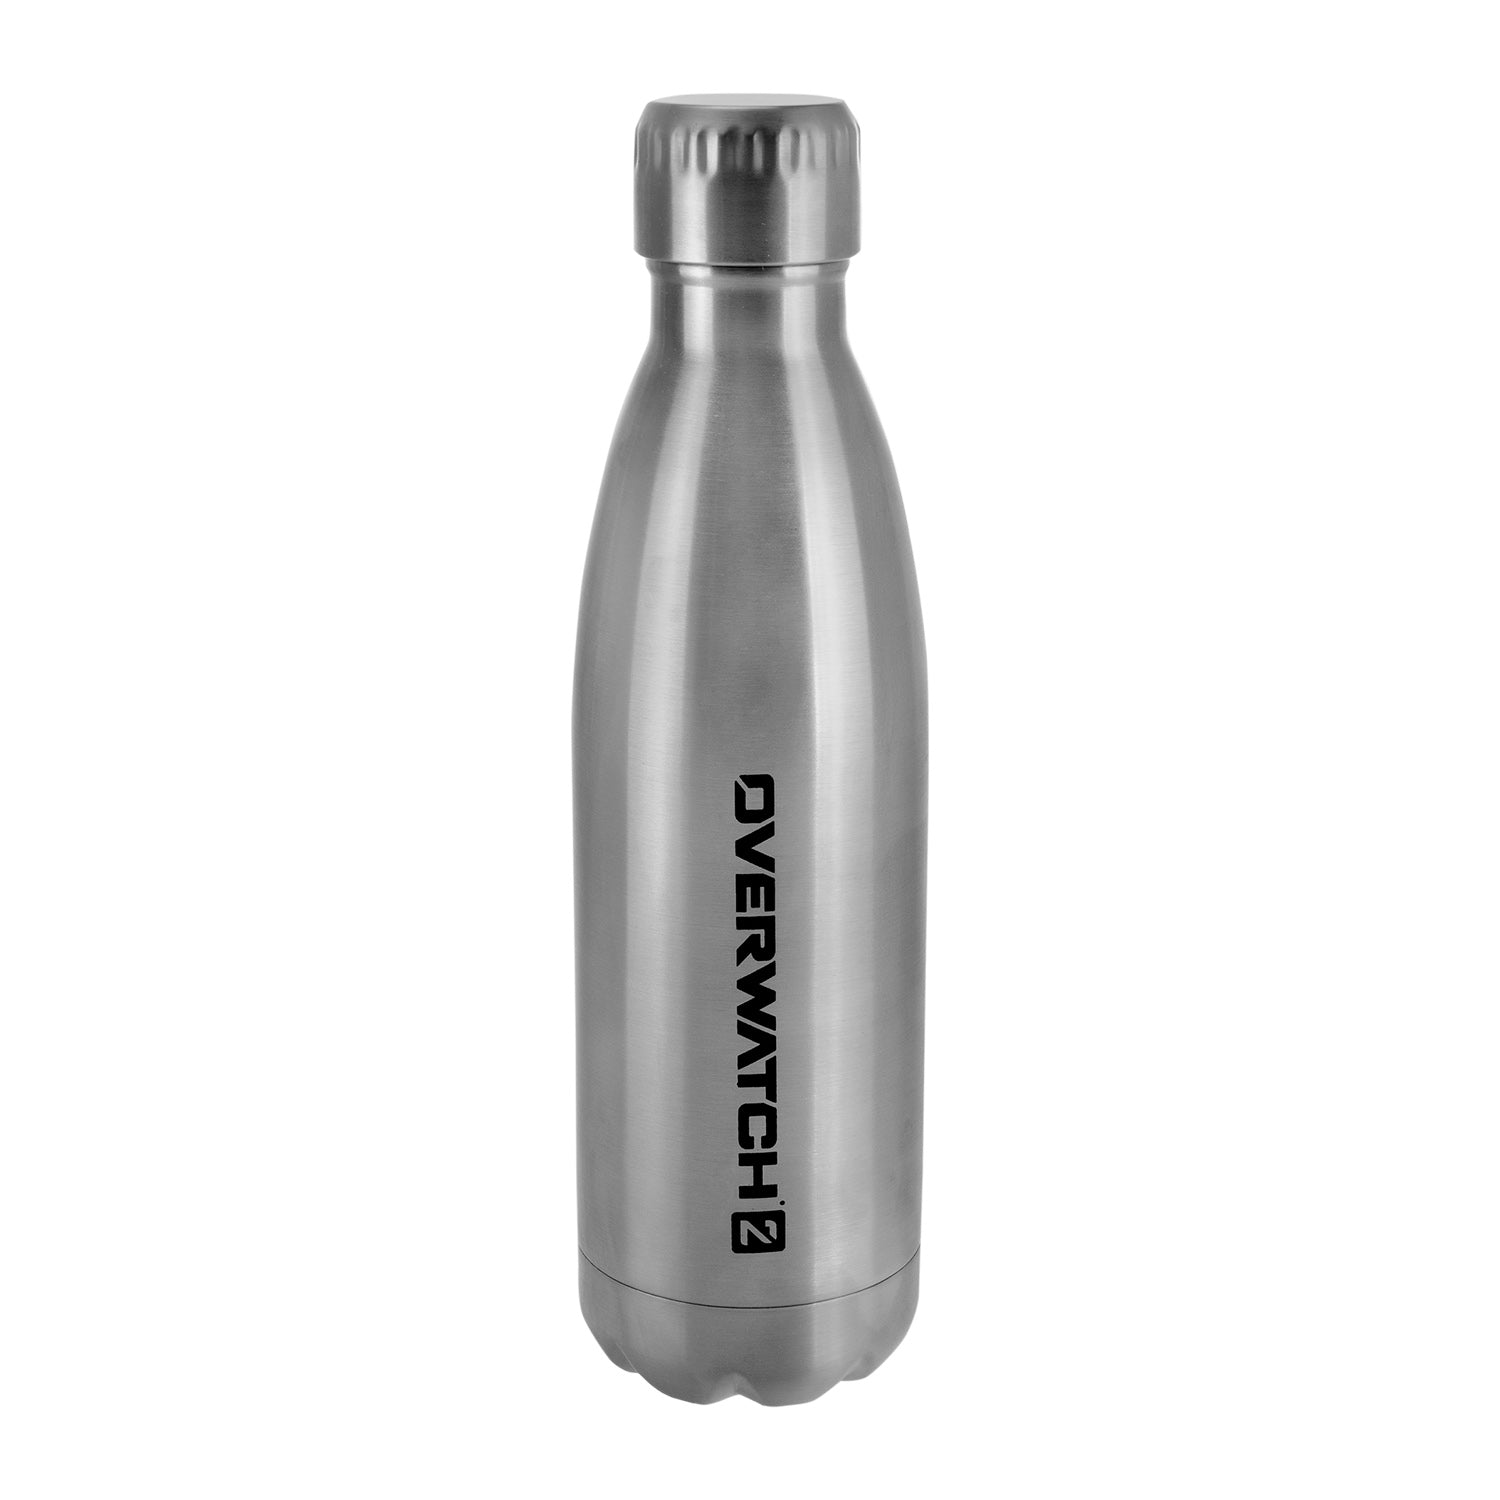 Overwatch 2 17oz Stainless Steel Water Bottle - Back View